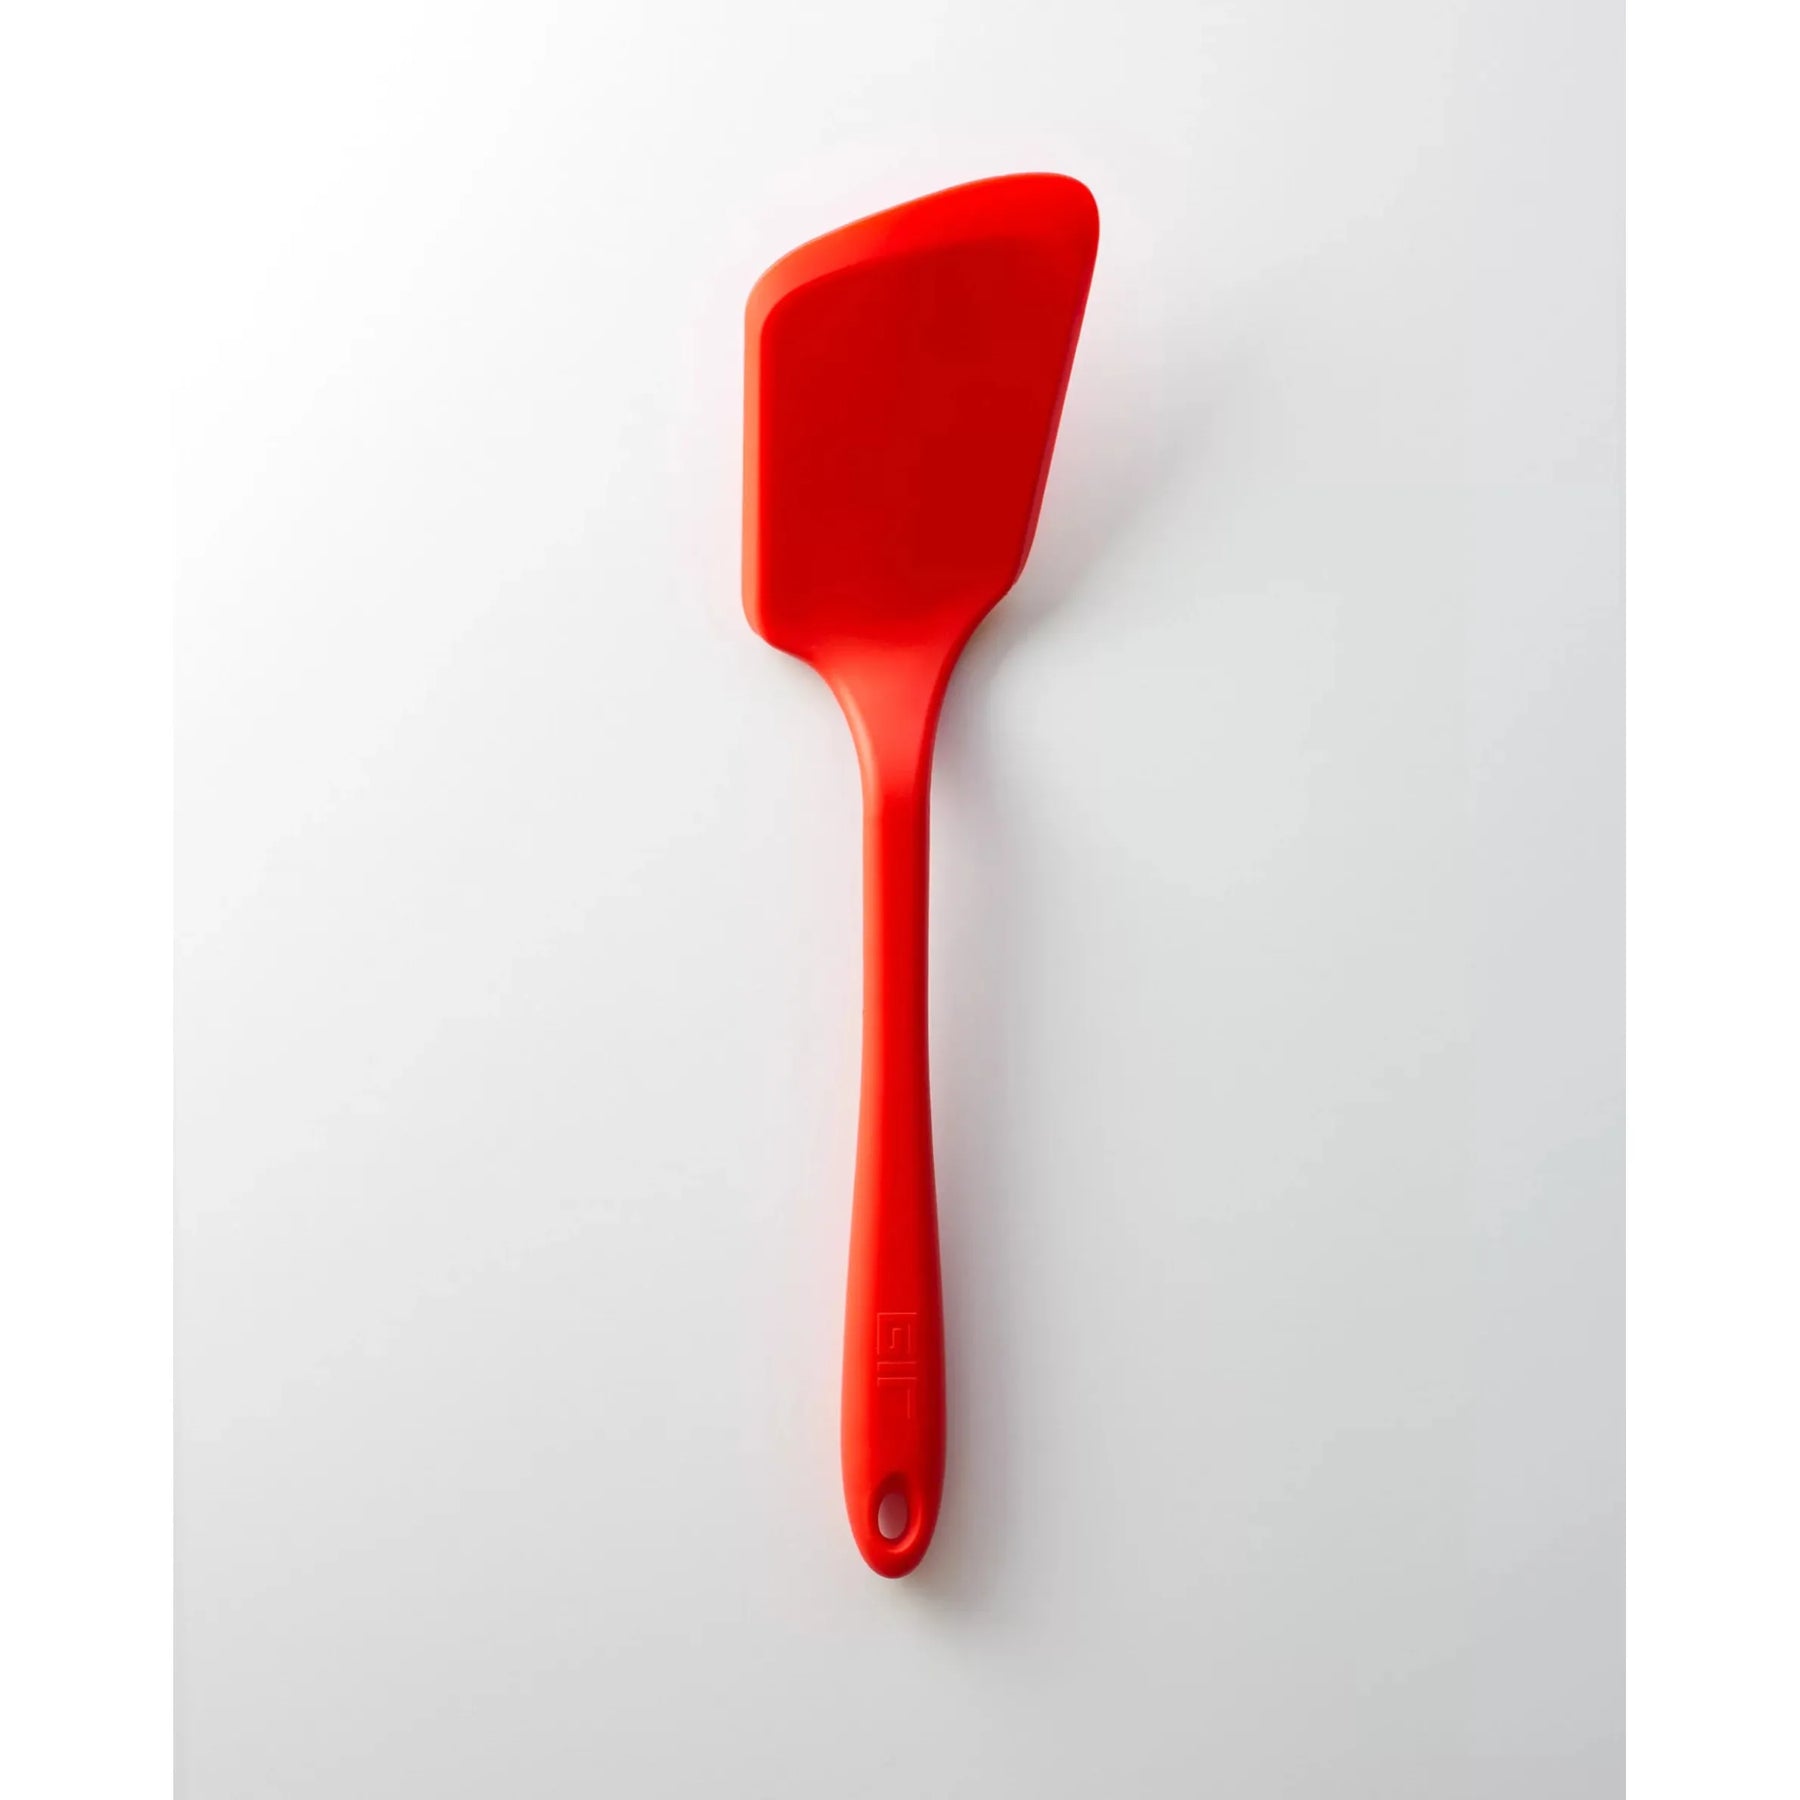 Mrs. Anderson's Baking High-Heat Spatula, Silicone Blade, 10-Inch